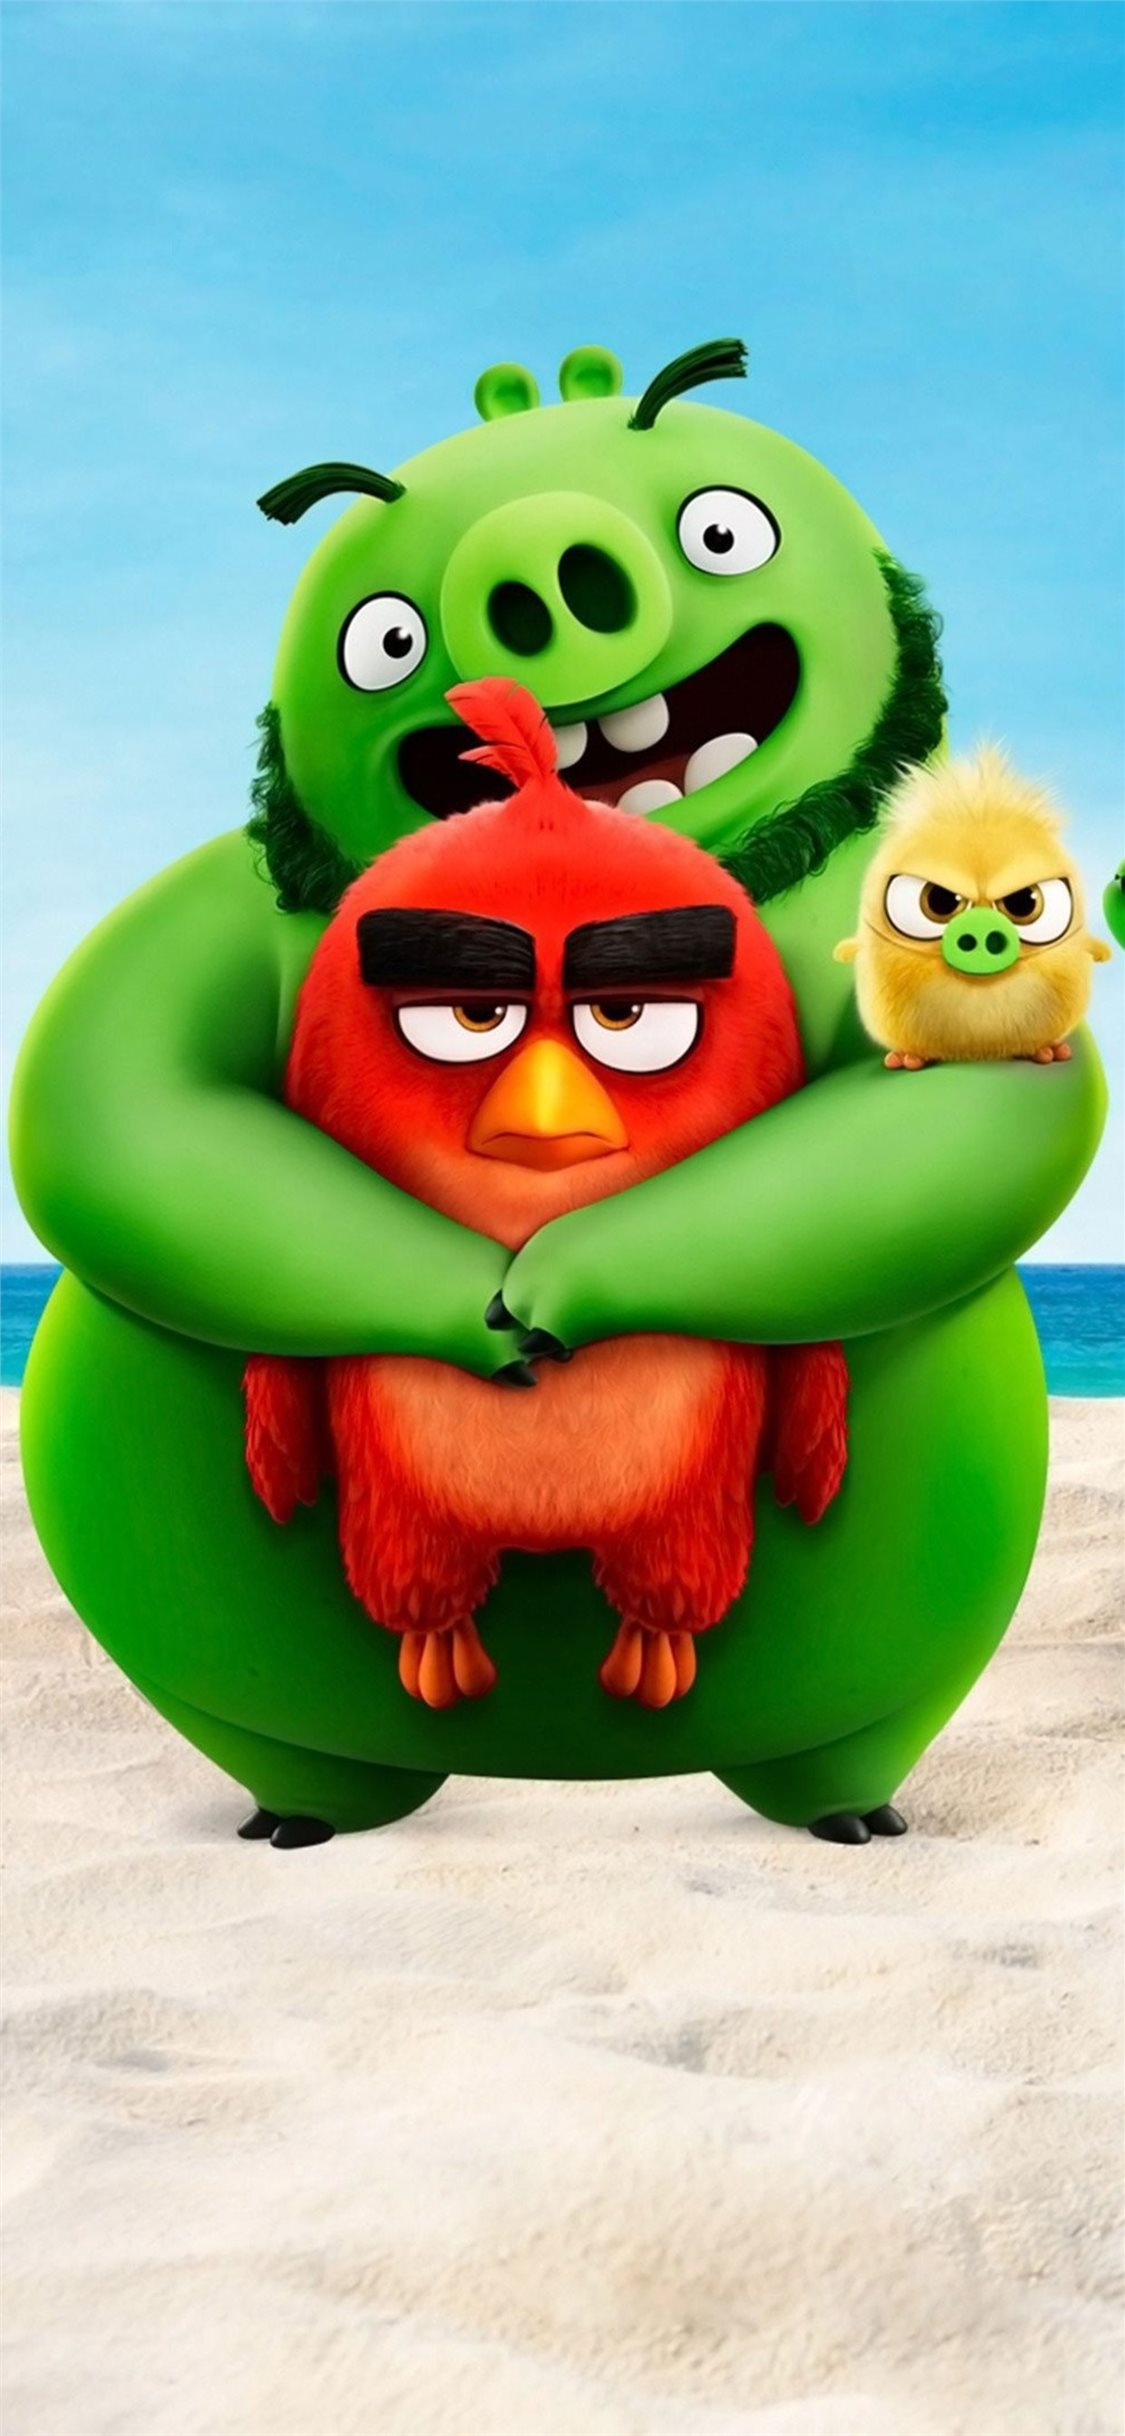 Angry Birds Movie 2 - HD Wallpaper 